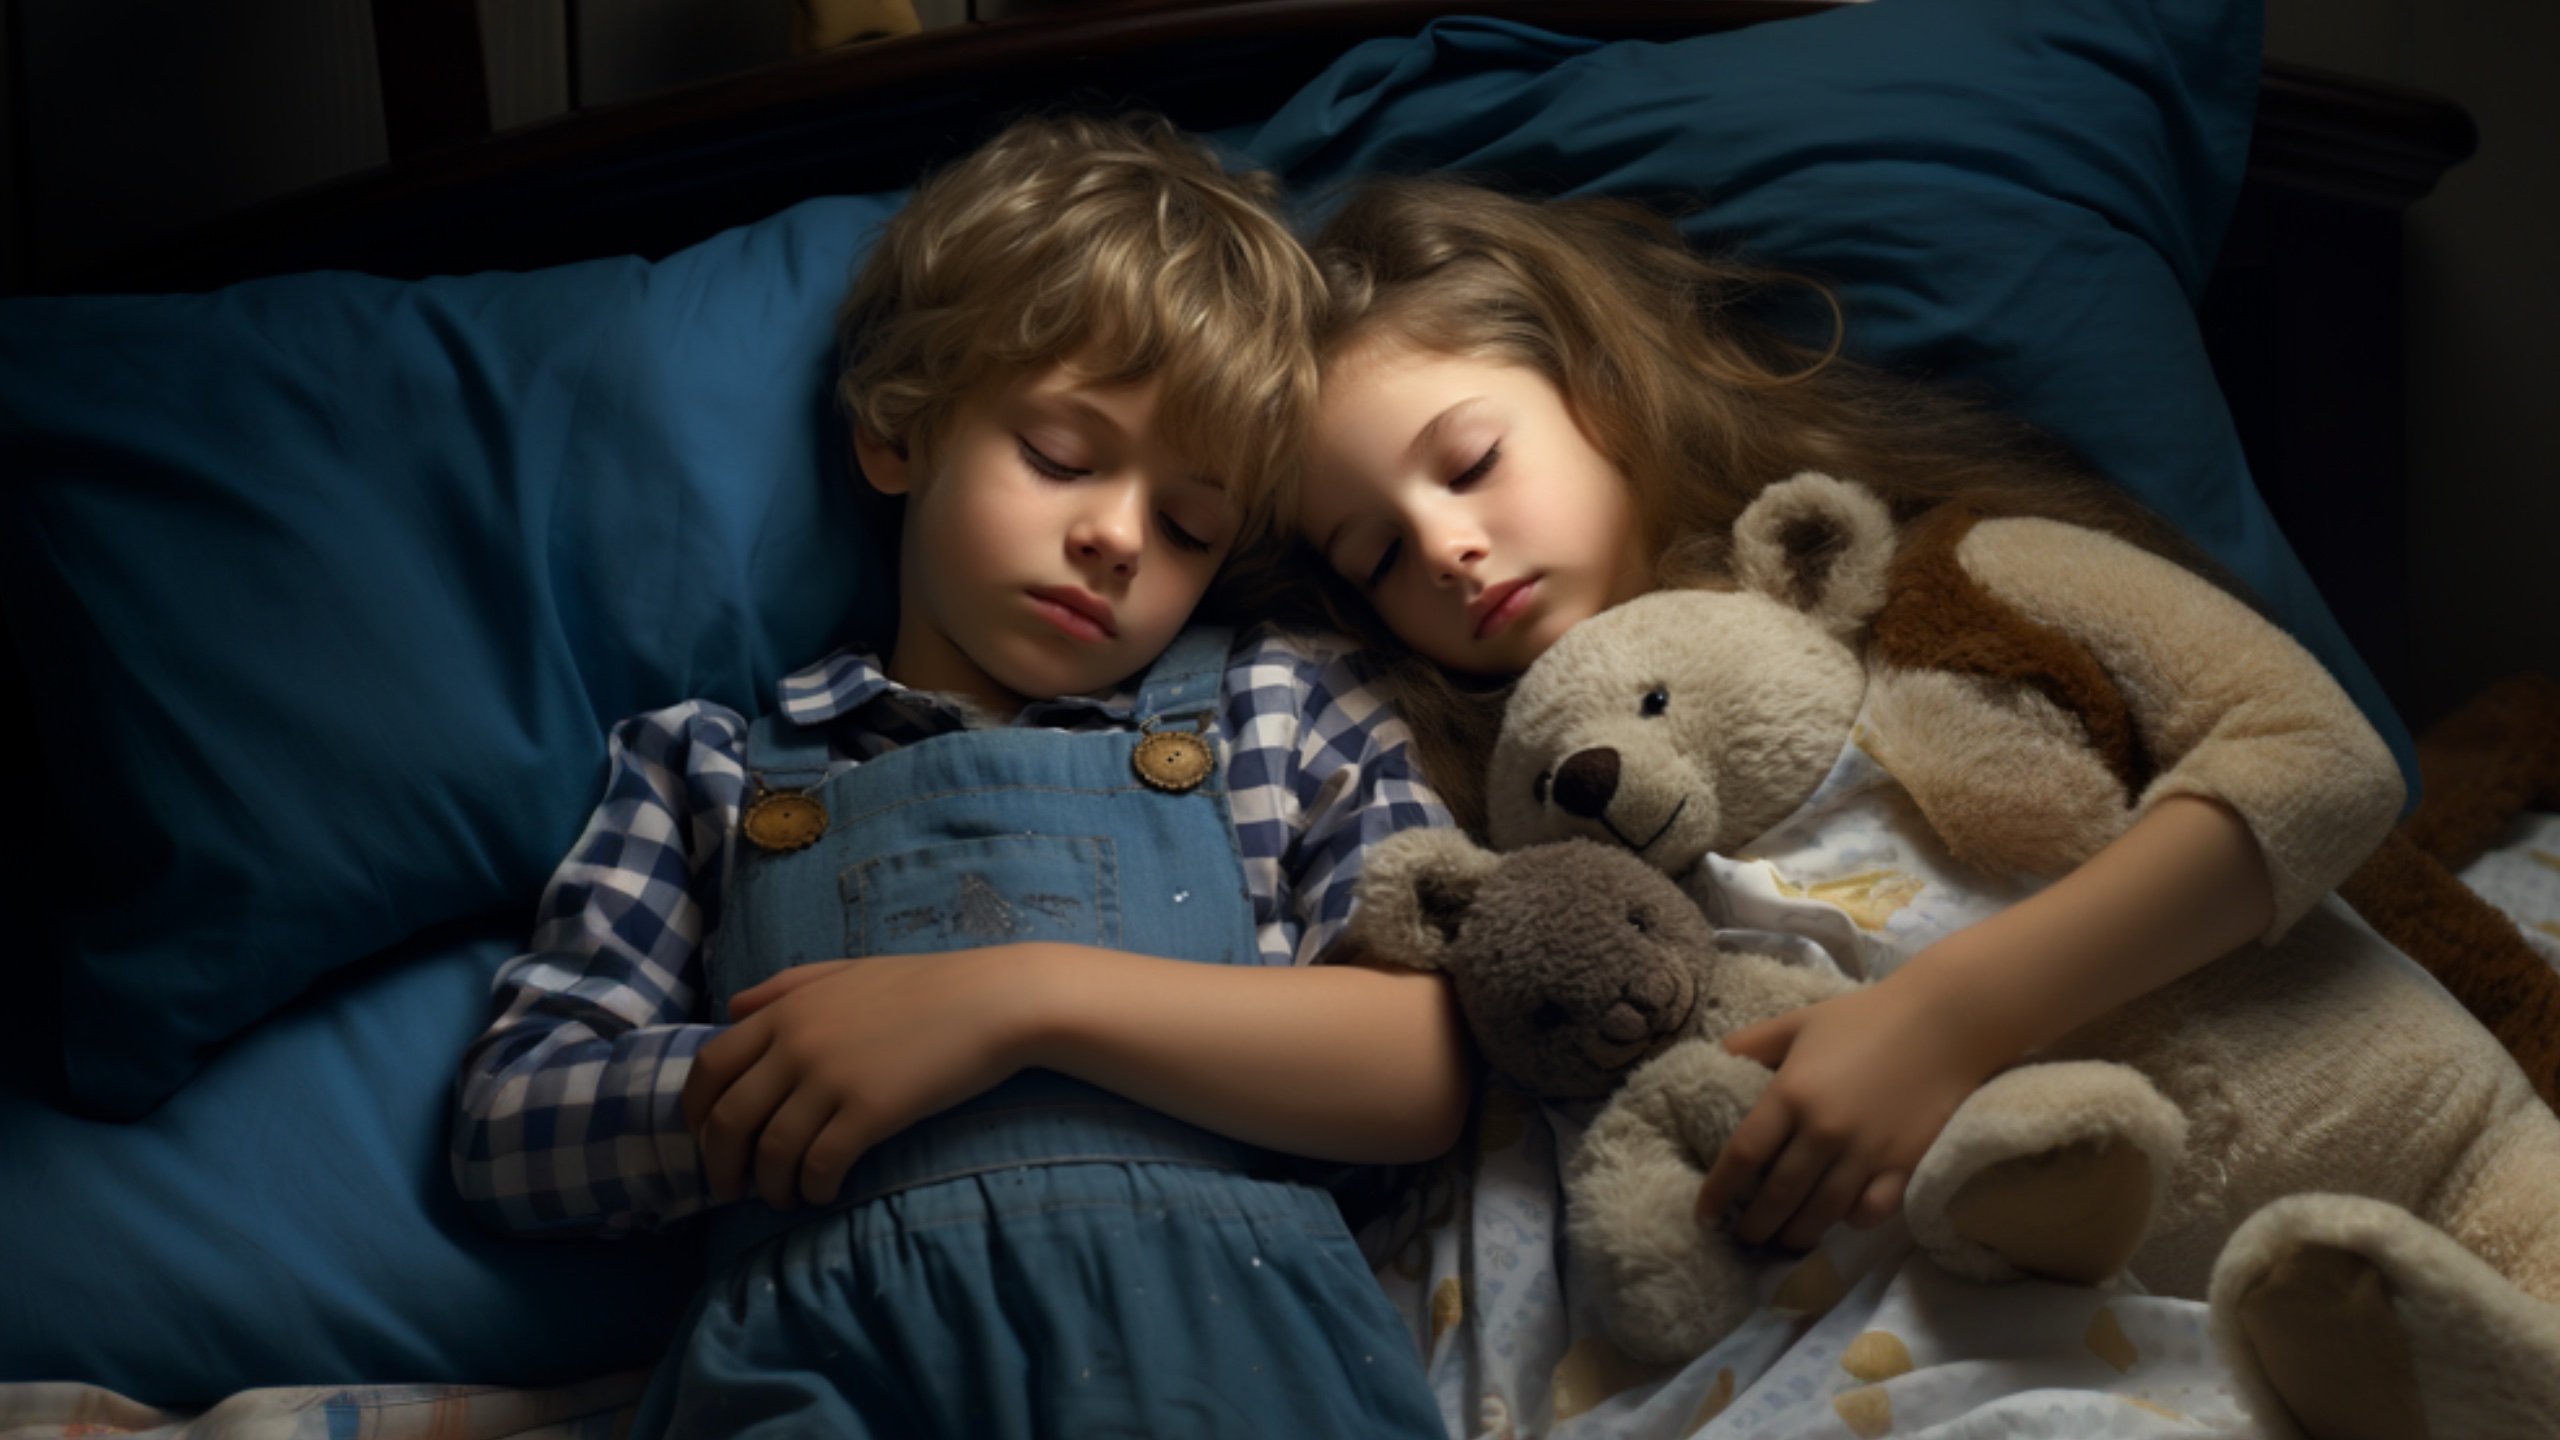 Legal and Ethical Concerns Raised as Generative AI Lulls Kids to Bed